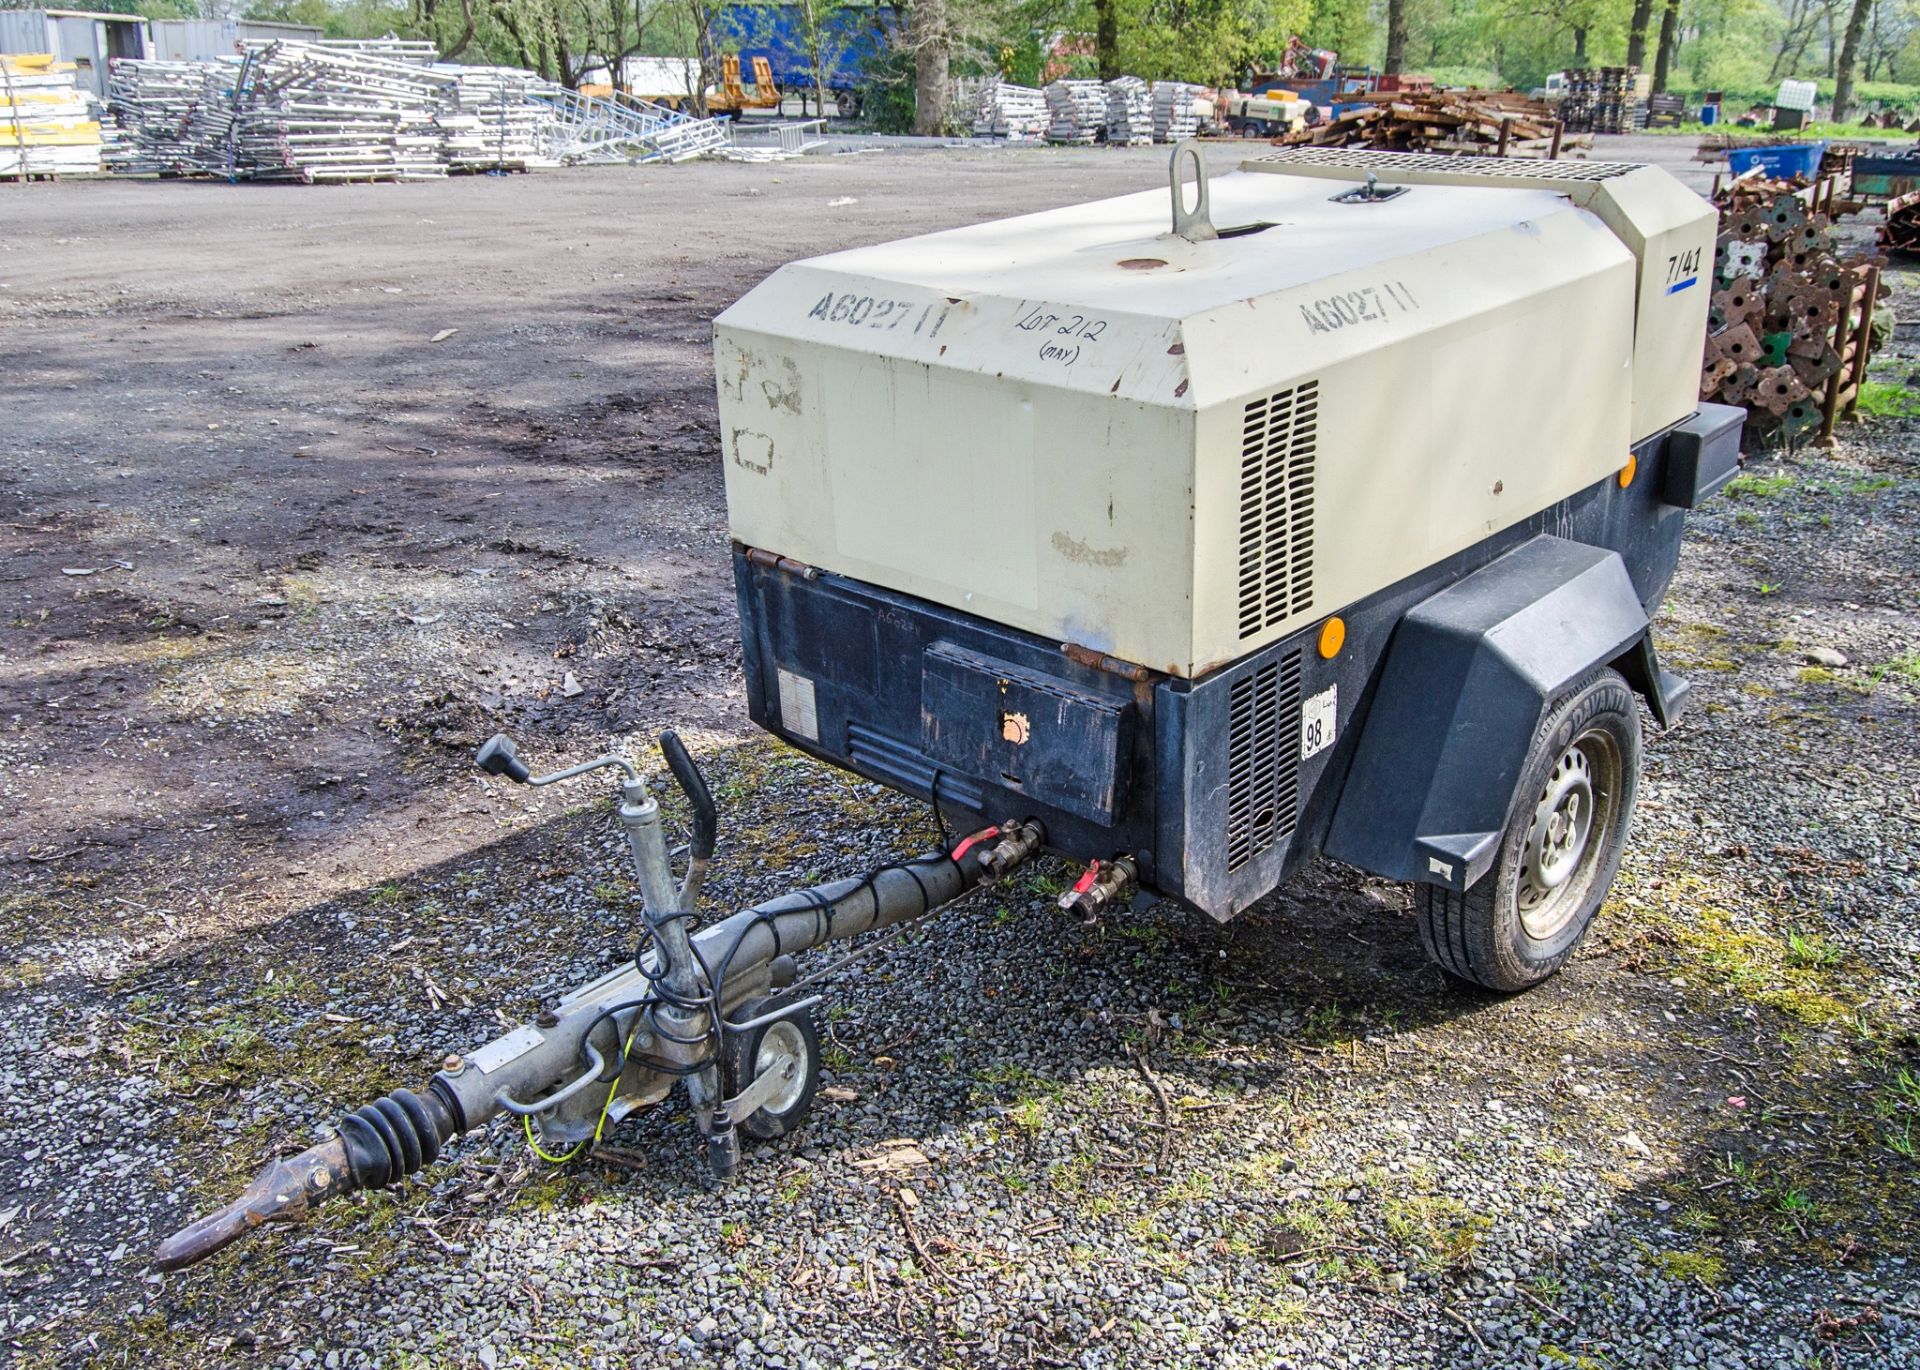 Doosan 741 diesel driven fast tow mobile air compressor Year: 2013 S/N: 432032 Recorded Hours: